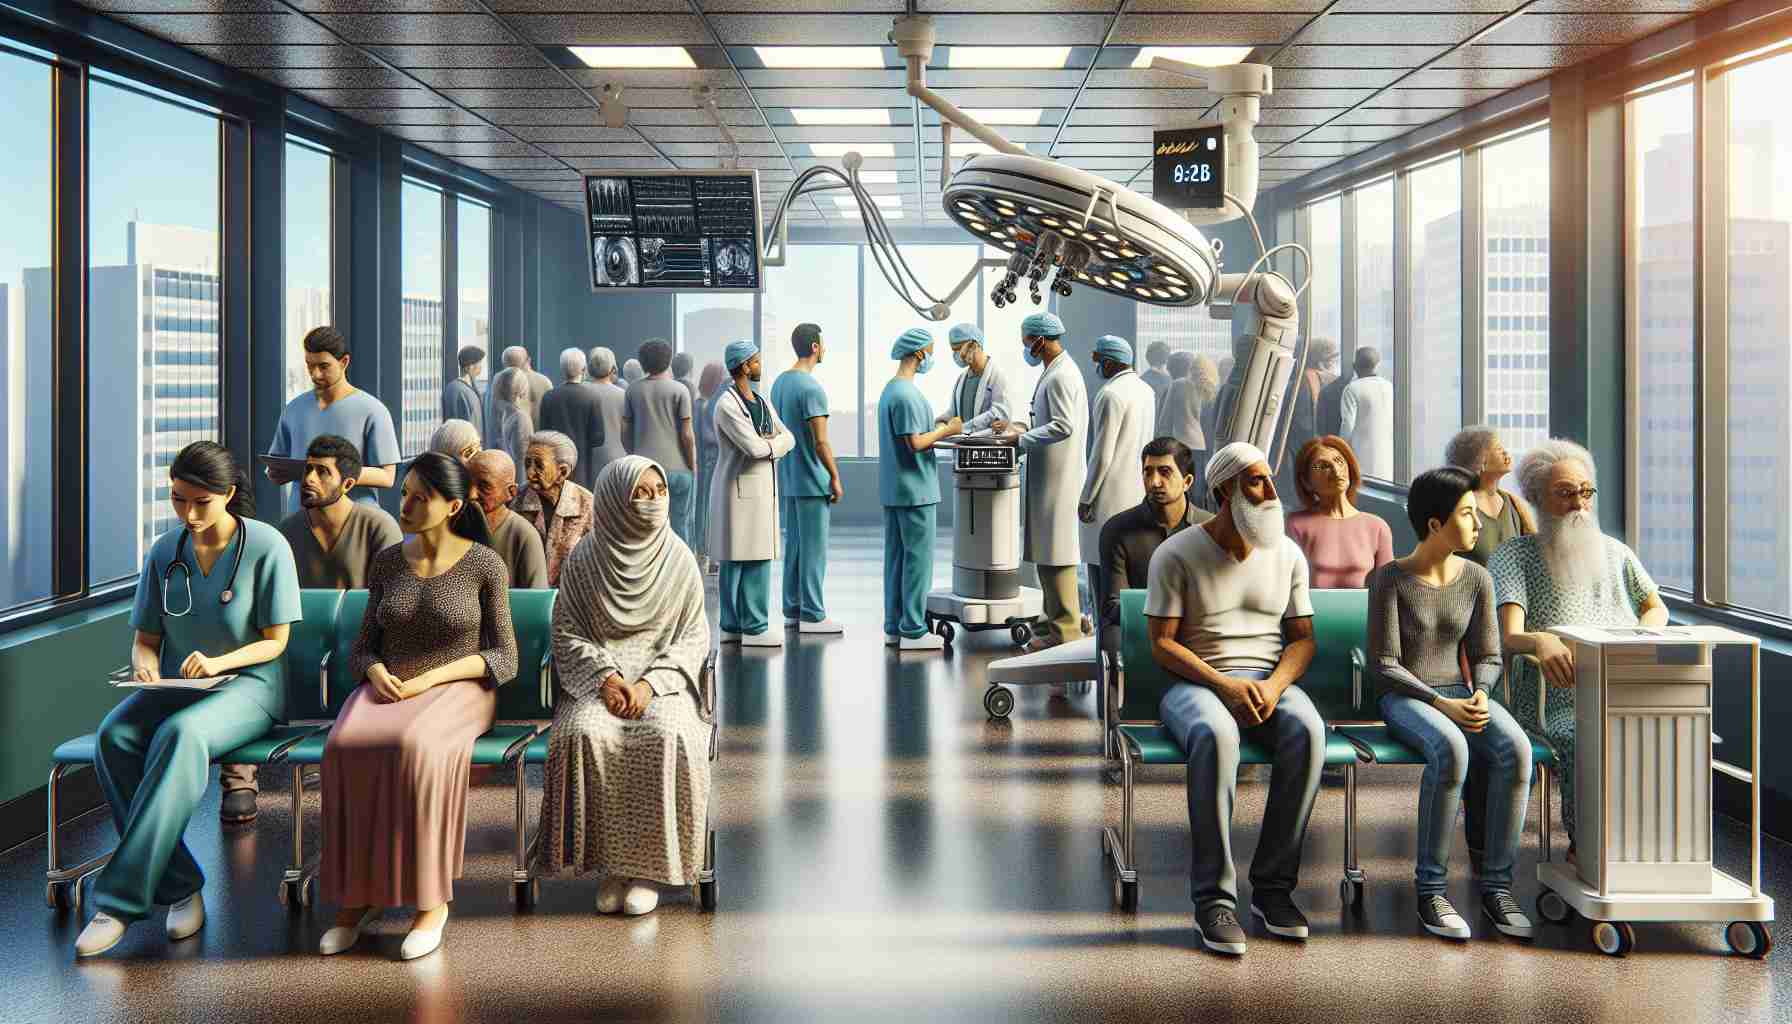 High-definition, realistic illustration of the need for the modernization of healthcare infrastructure. Depict an out-of-date hospital, with long waiting lines filled with diverse people including a Caucasian woman, a Hispanic man, and a South Asian elder. These patients are waiting in an old-fashioned waiting room with outdated equipment. Contrast this with an ultra-modern hospital wing with cutting-edge facilities including robotic surgical equipment and a state-of-the-art medical imaging room. In this modern area, showcase a Middle-Eastern female doctor and a Black male nurse working efficiently with the new technology.